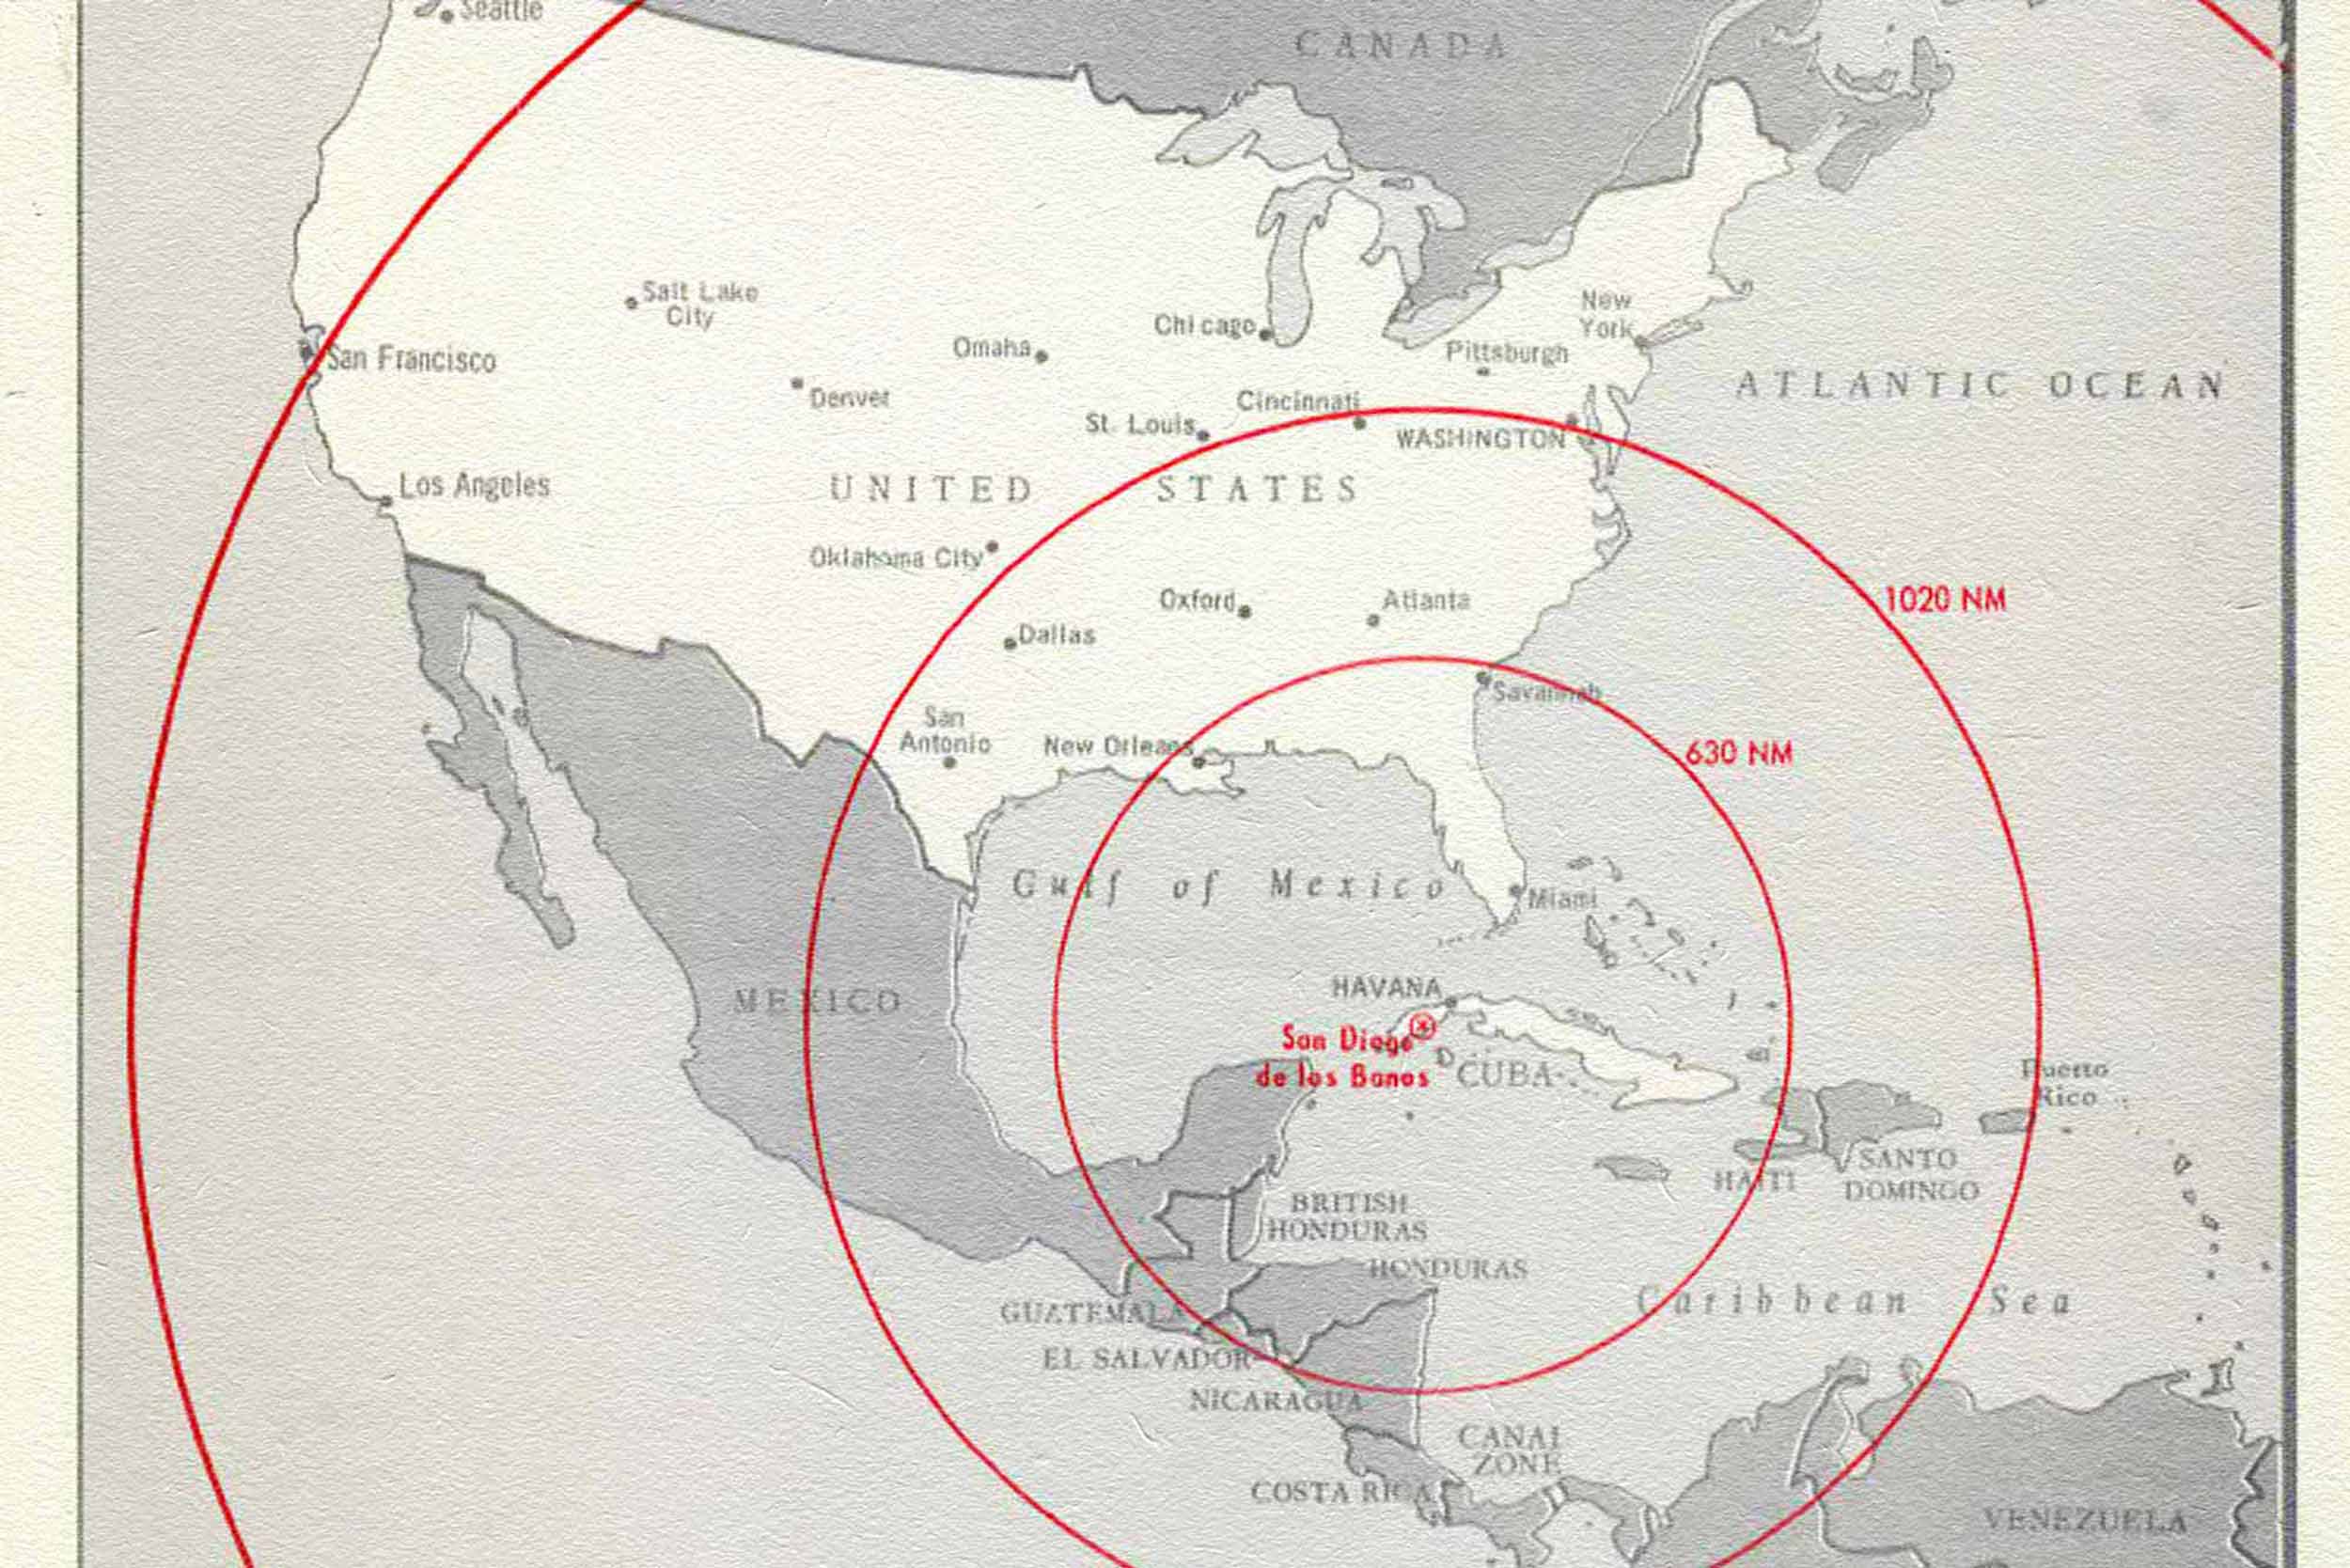 Map of the USA and central America with red circles showing missile ranges